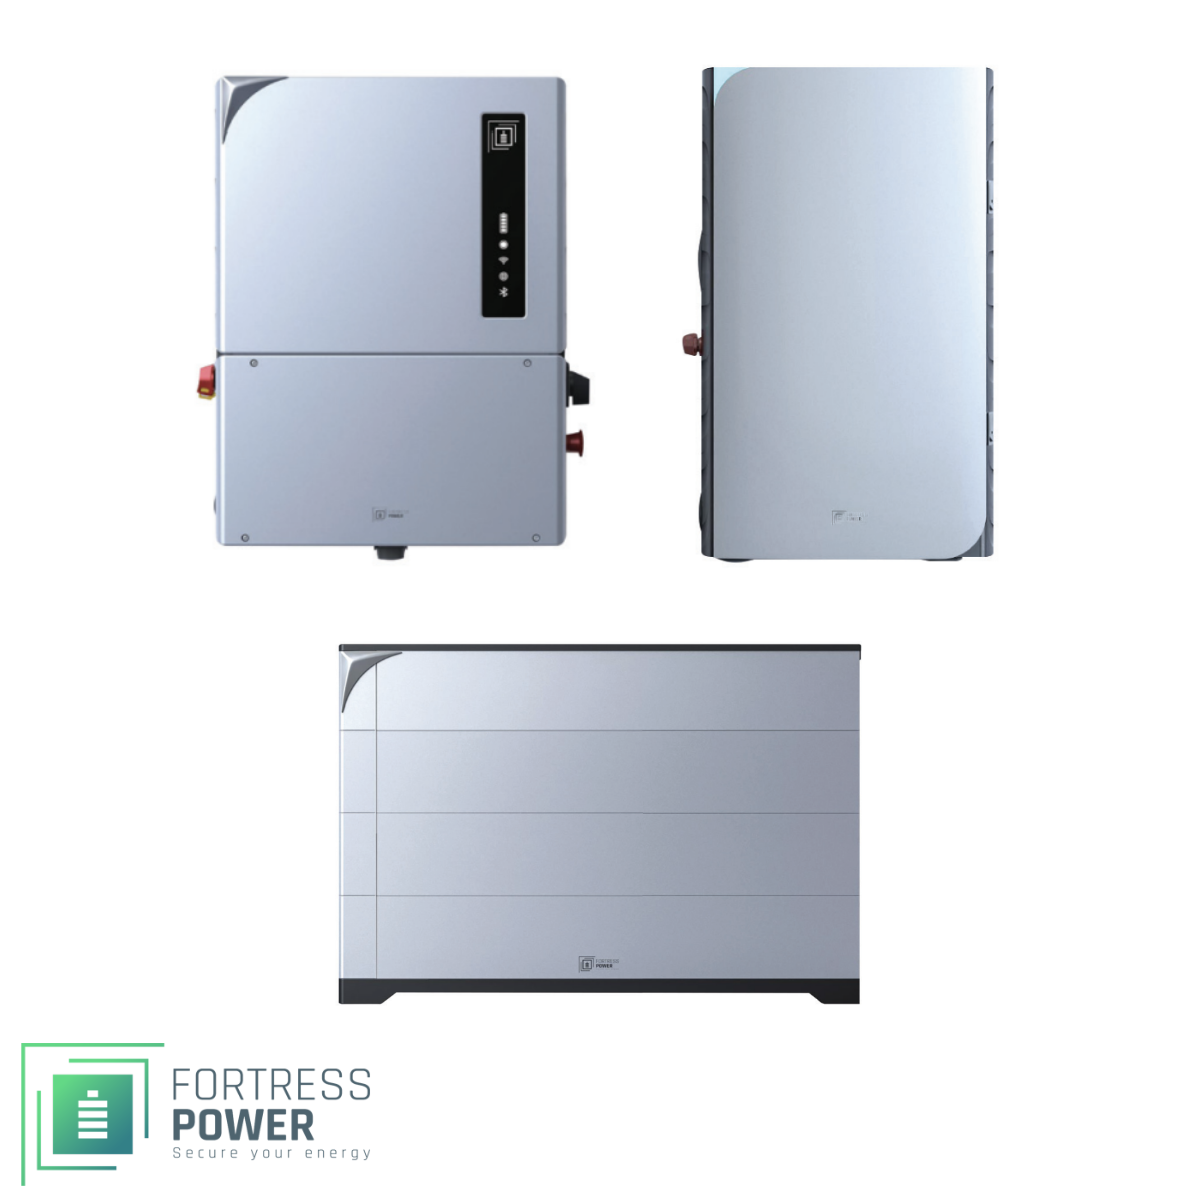 Fortress-Power-Avalon-7.6kW-14.7kWh-HV-ESS_1